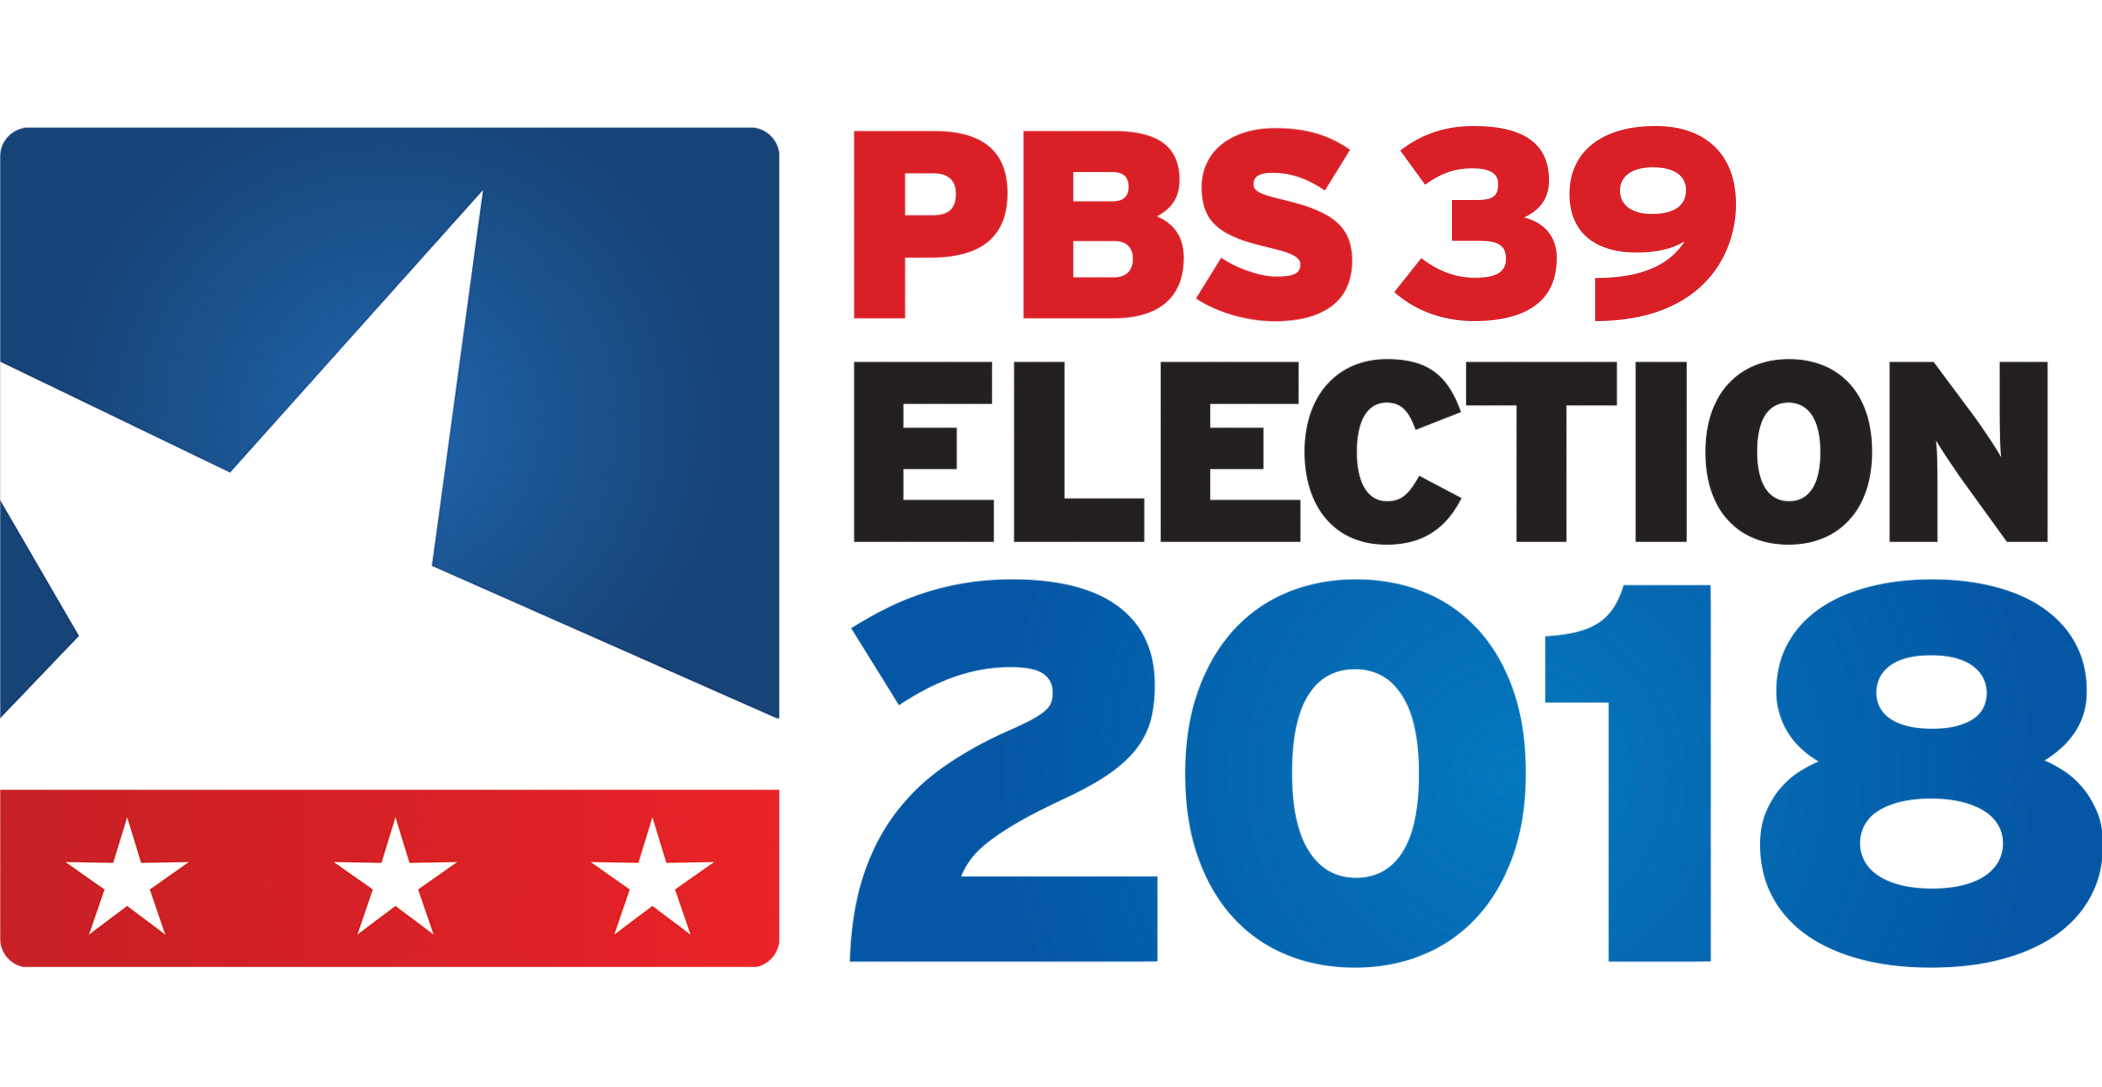 2018 PBS39 Election Coverage